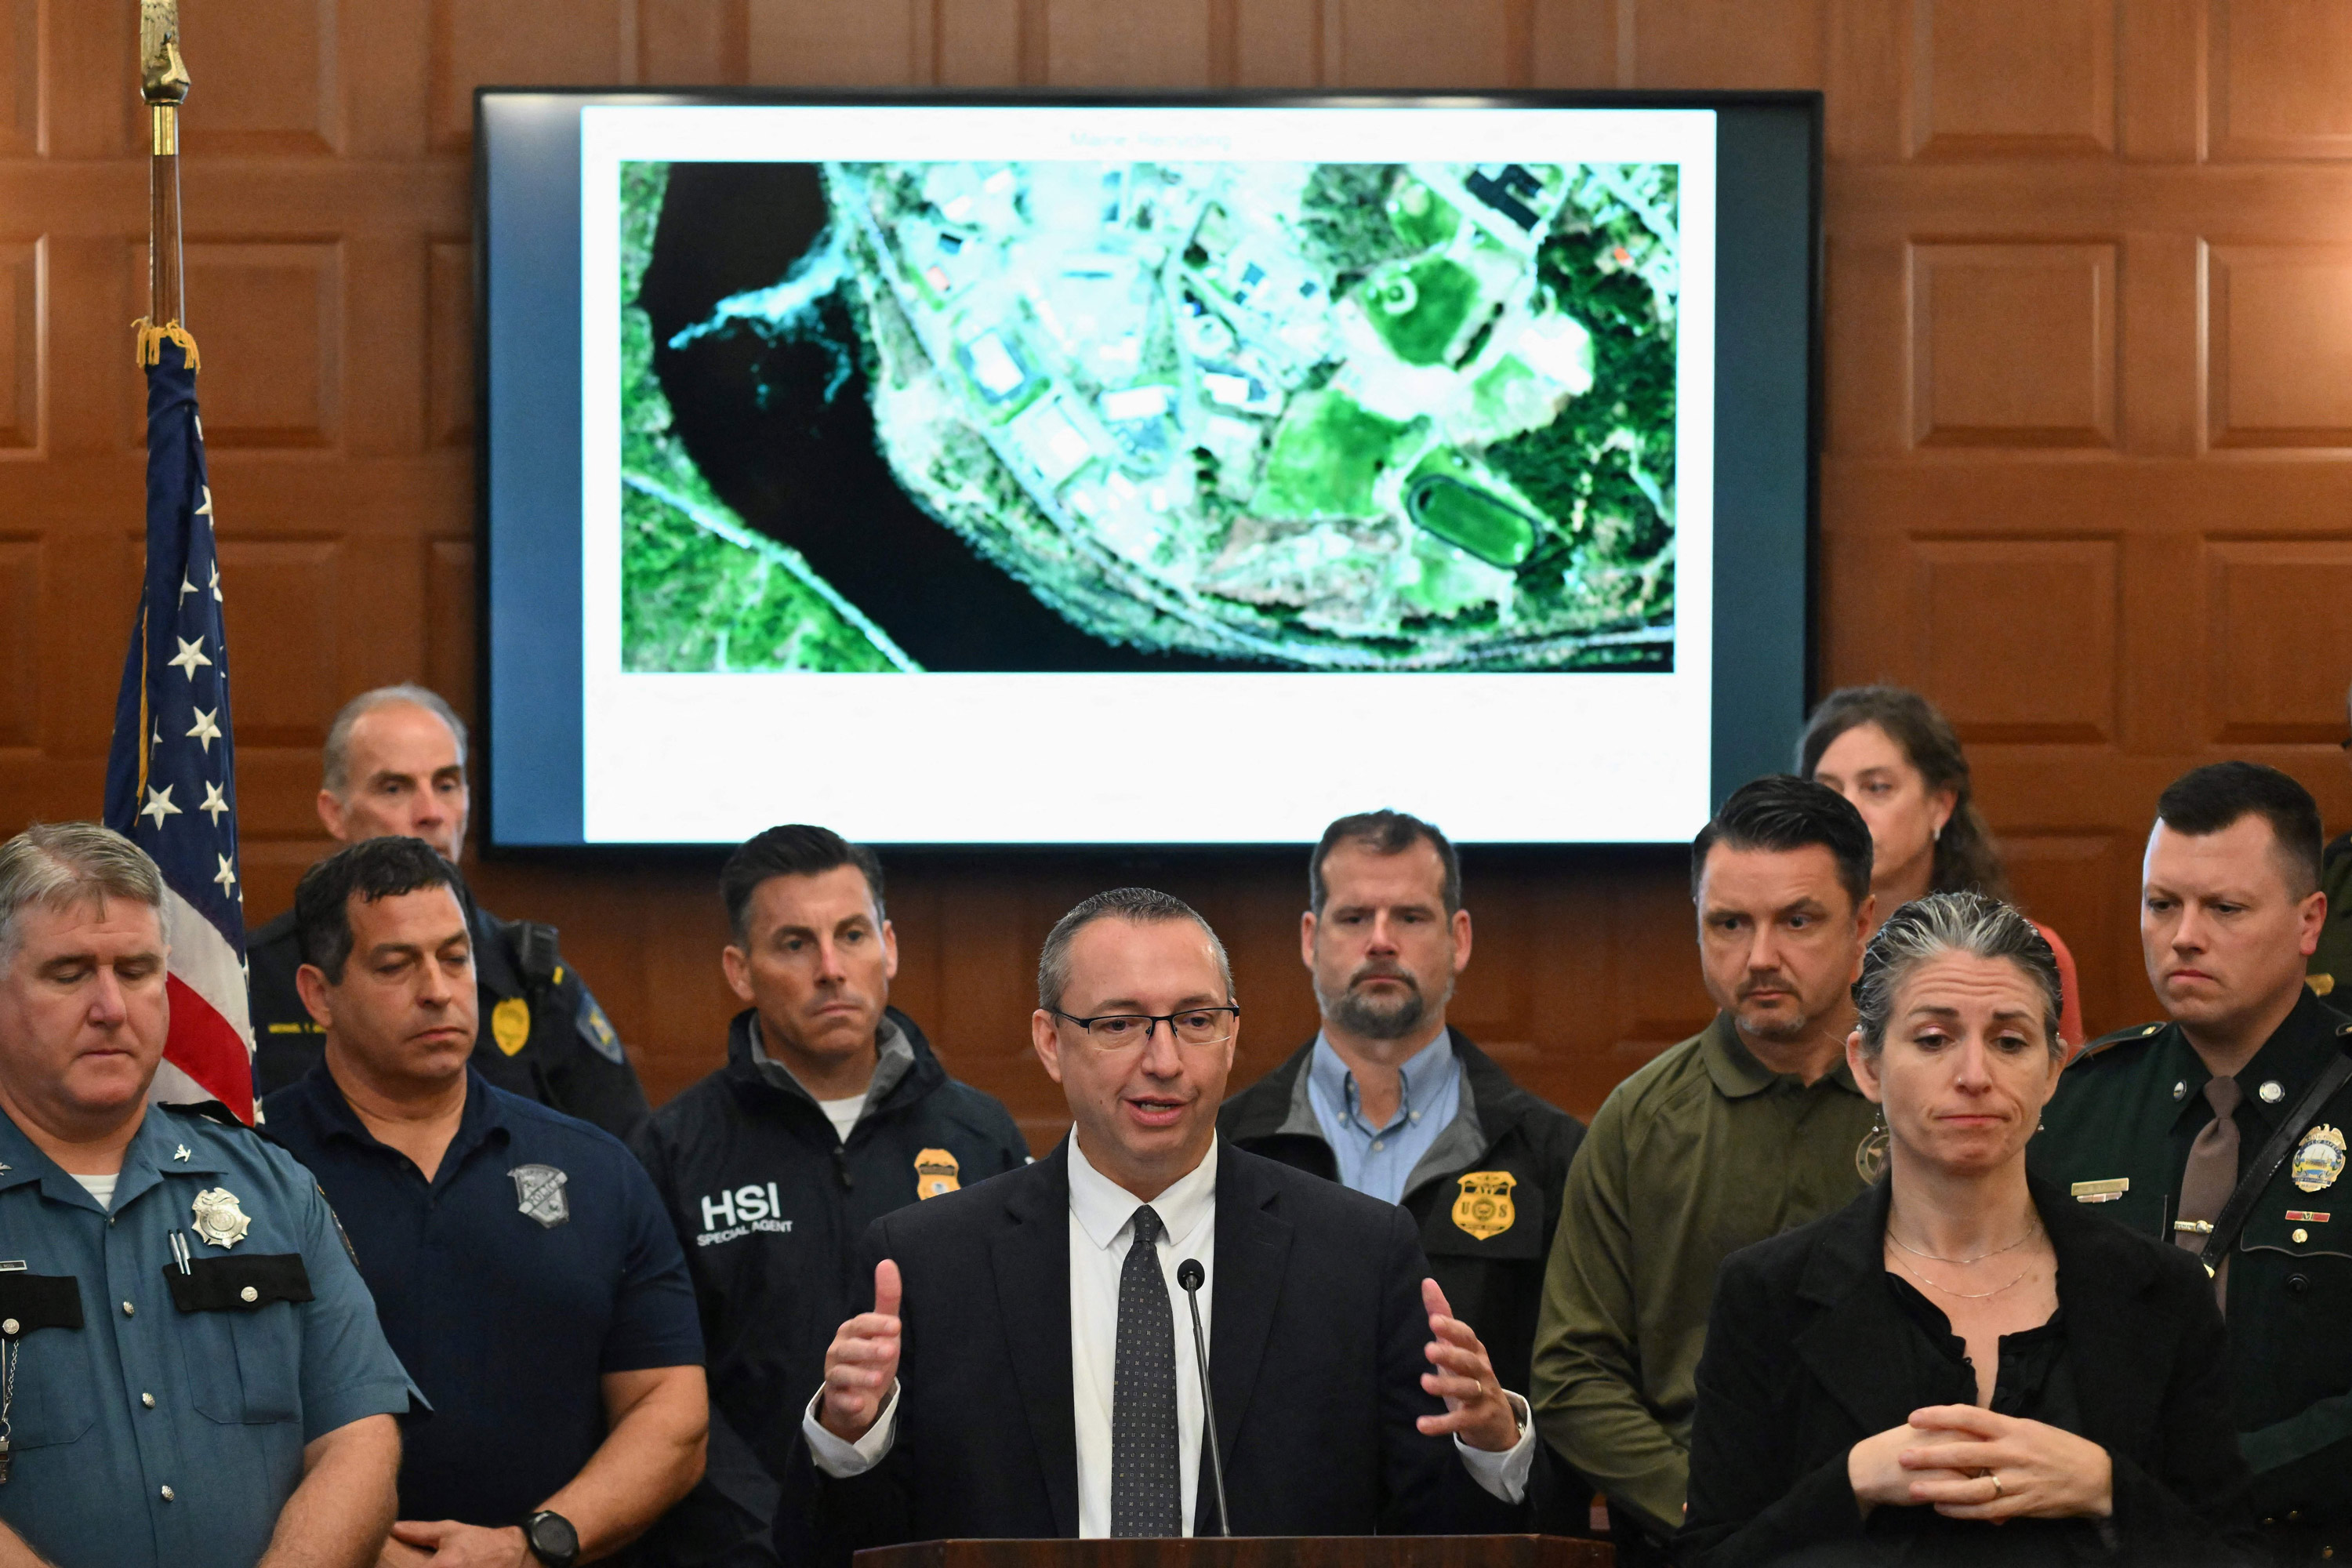 Maine Commissioner of Public Safety Mike Sauschuck speaks during a press conference at City Hall in Lewiston, Maine, on October 28, after the suspect in a mass shooting was found dead the previous day.